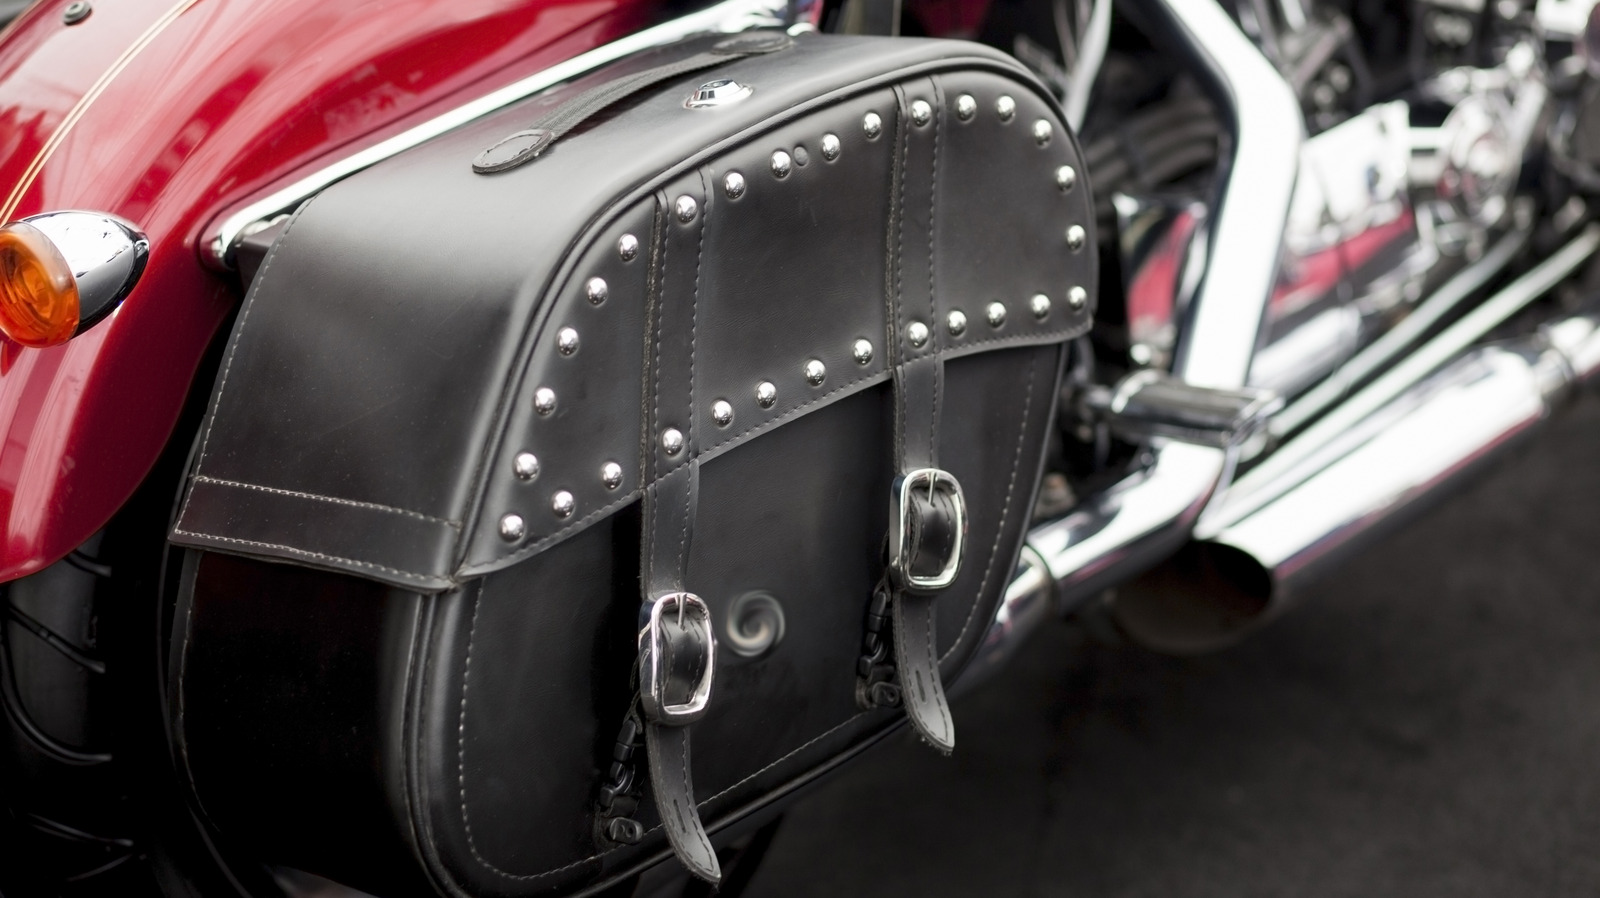 5 Things You Need To Consider Before Buying Motorcycle Saddlebags